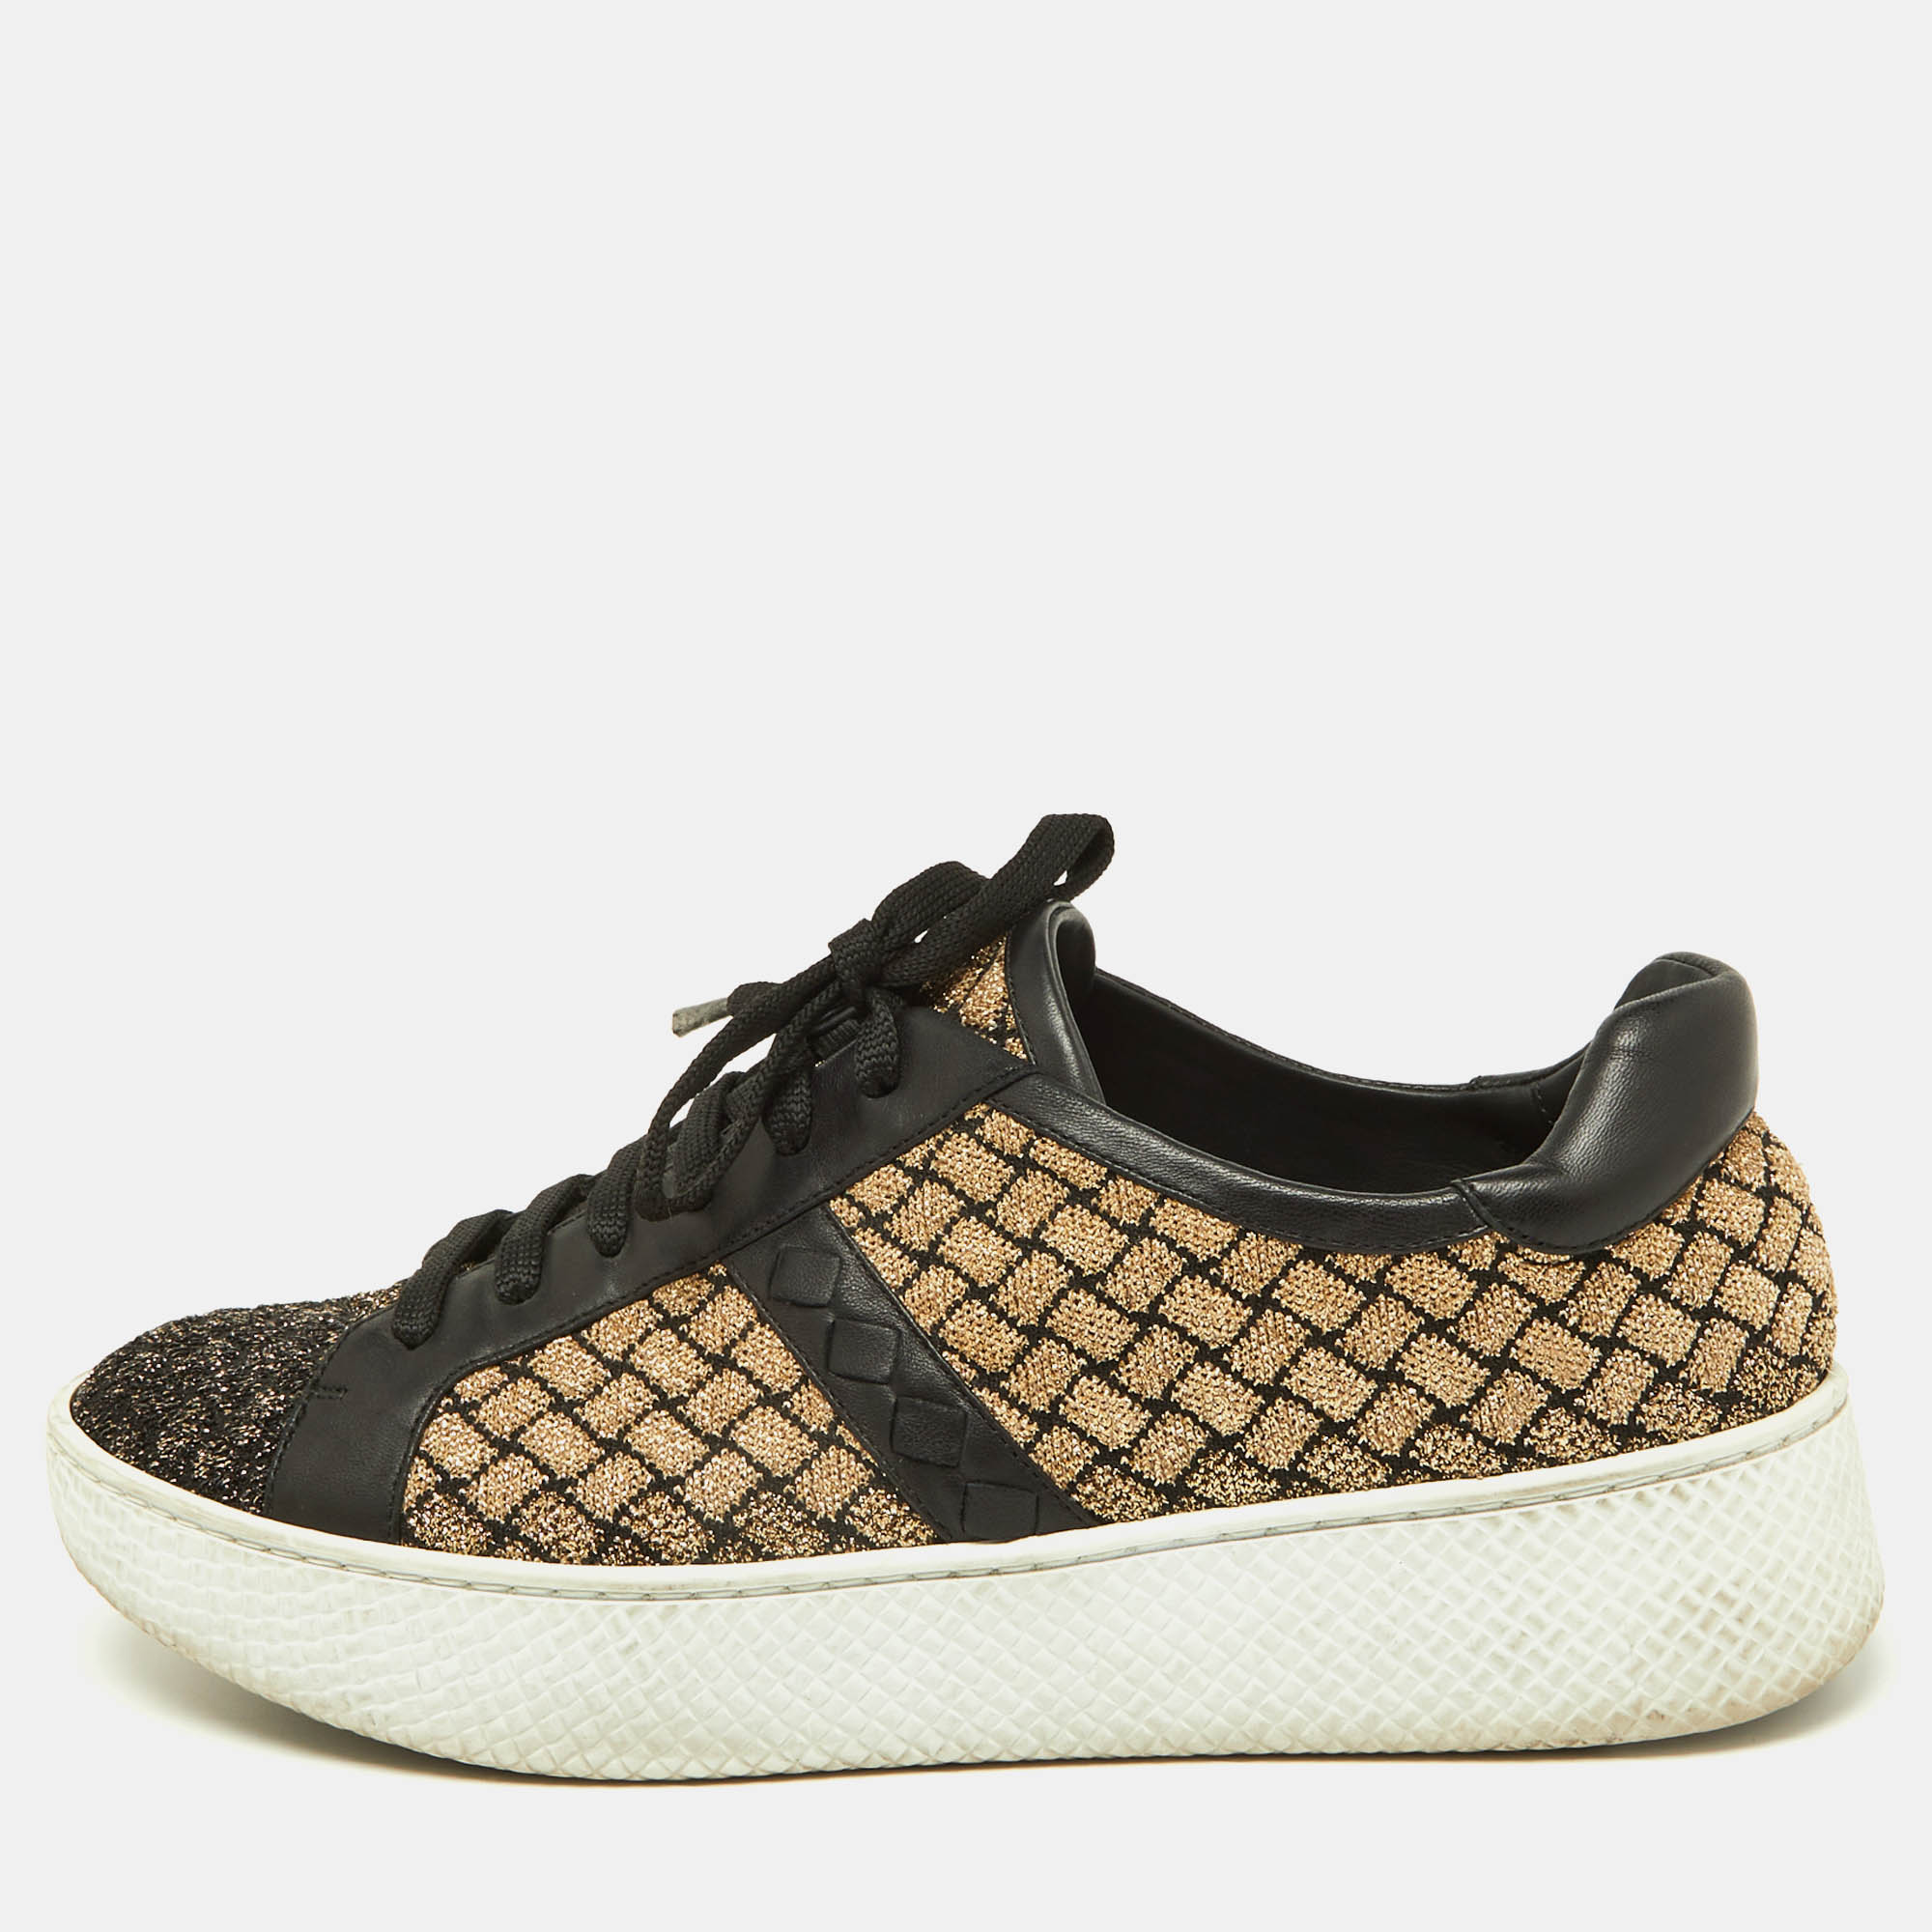 Bottega veneta black/gold woven fabric and leather low top sneakers size 39.5